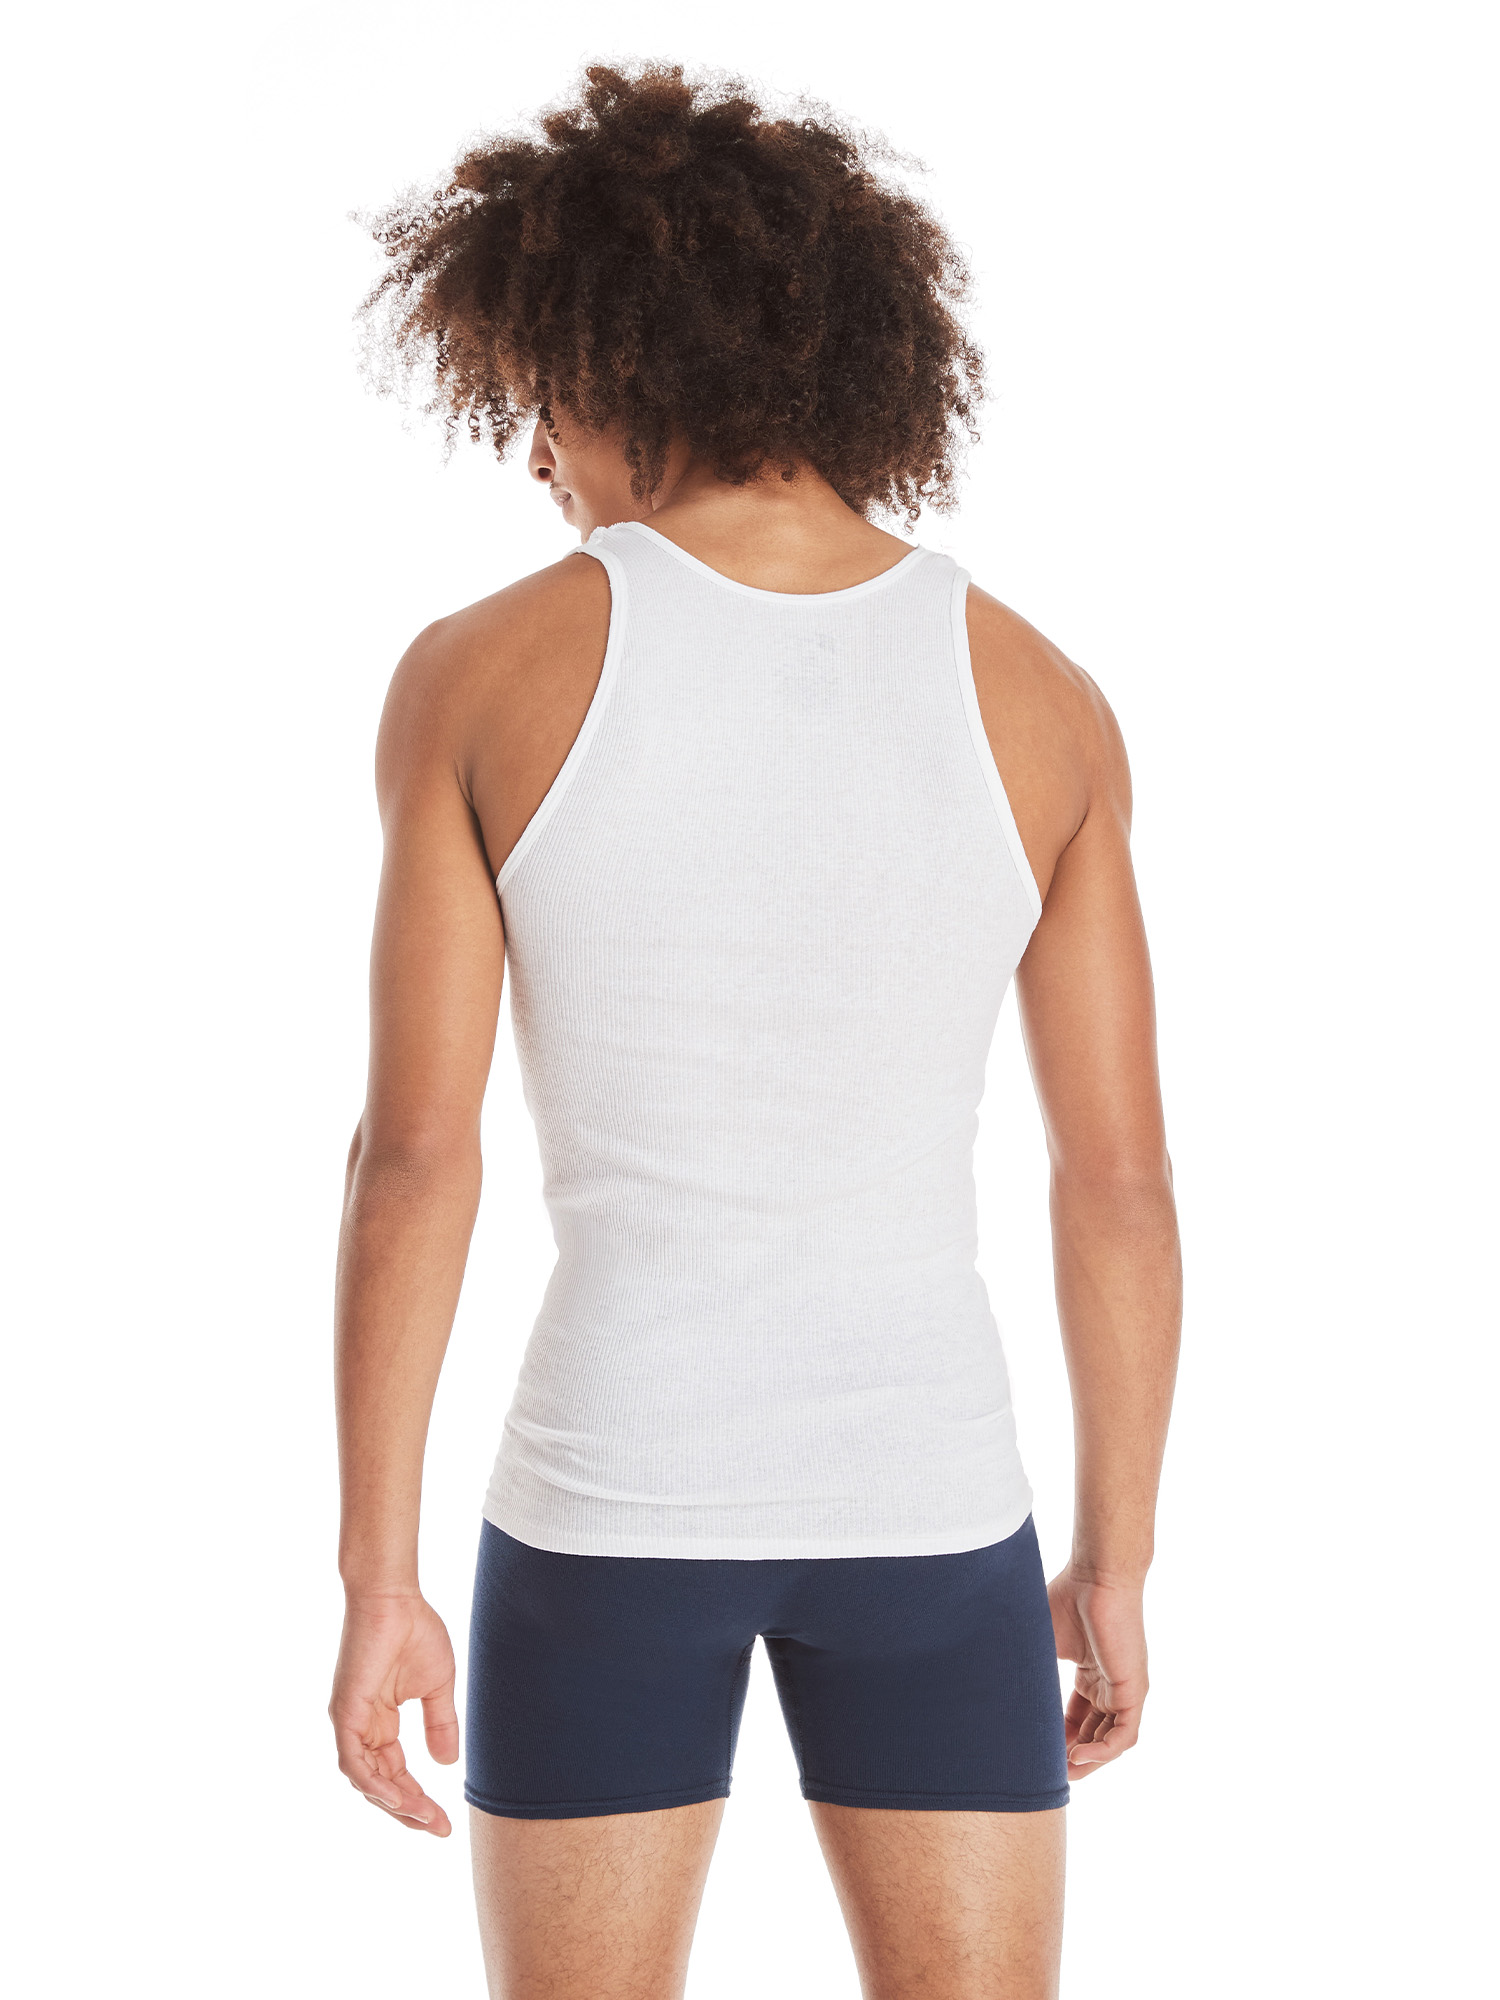 Hanes Men's Tank Top Undershirt Pack in White, Ribbed Moisture-Wicking Cotton, 6-Pack - image 5 of 10